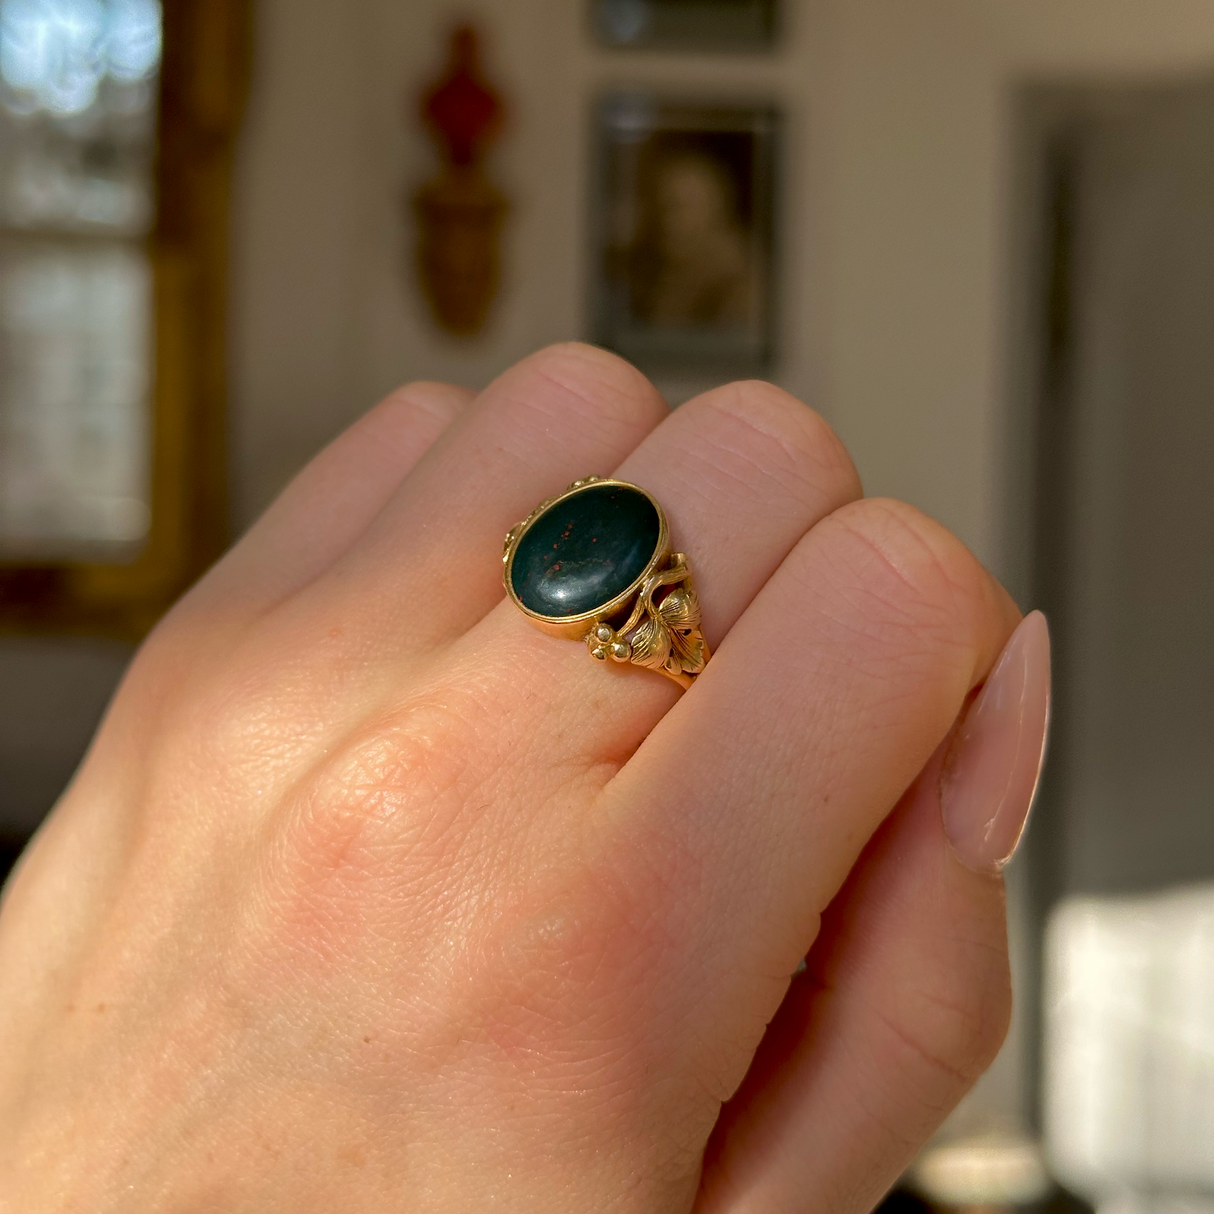 Antique, Victorian Bloodstone Signet Ring, 18ct Yellow Gold worn on closed hand. 